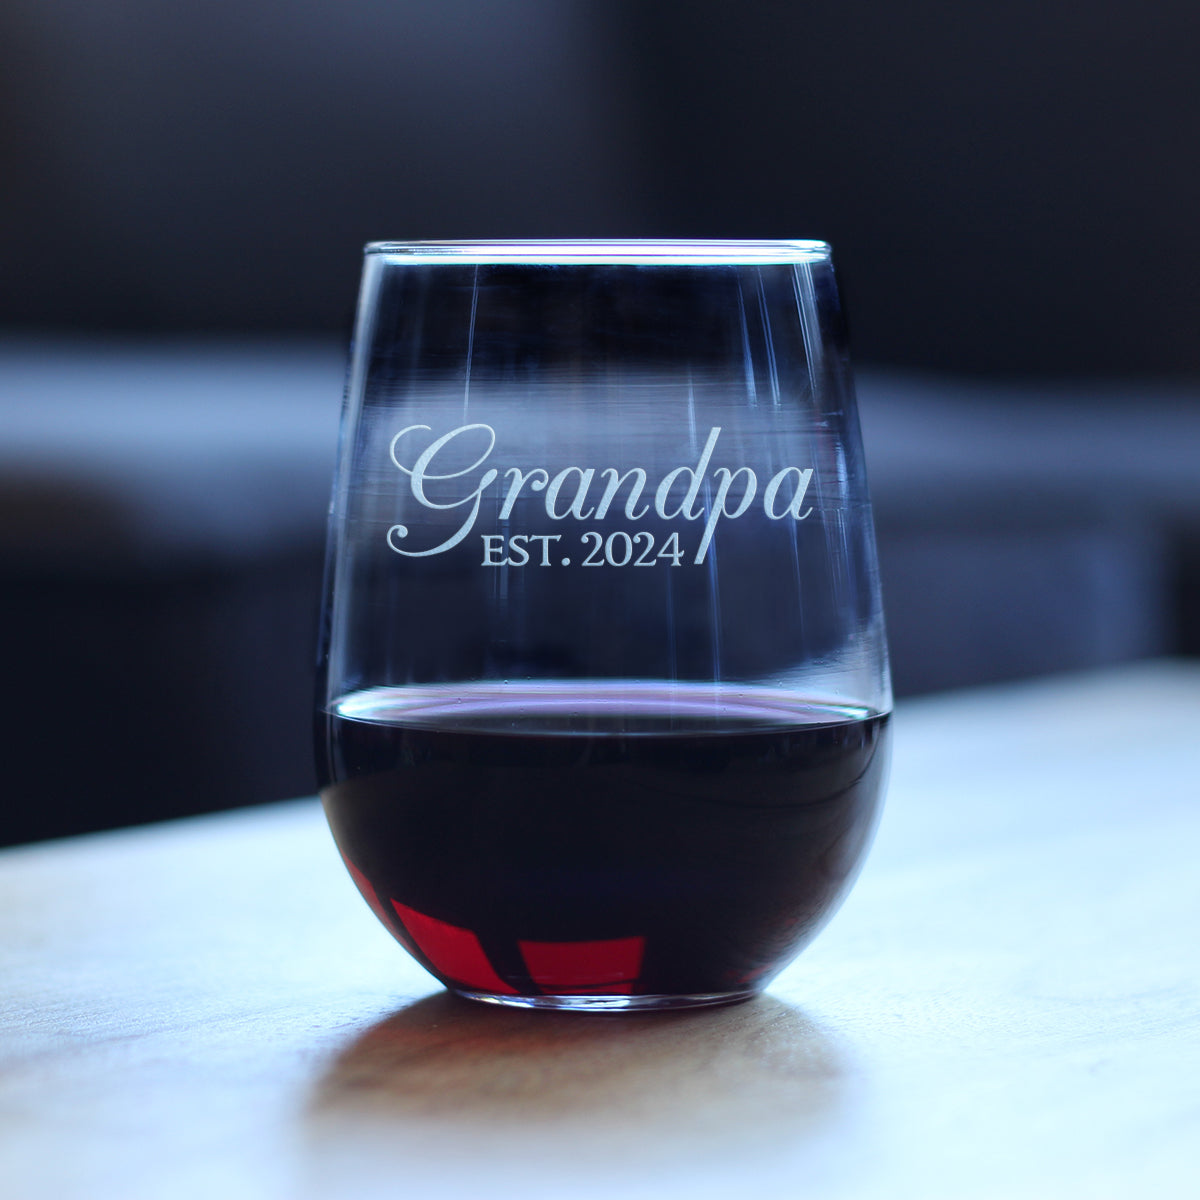 Grandpa Est 2024 - New Grandfather Stemless Wine Glass Gift for First Time Grandparents - Decorative 17 Oz Large Glasses